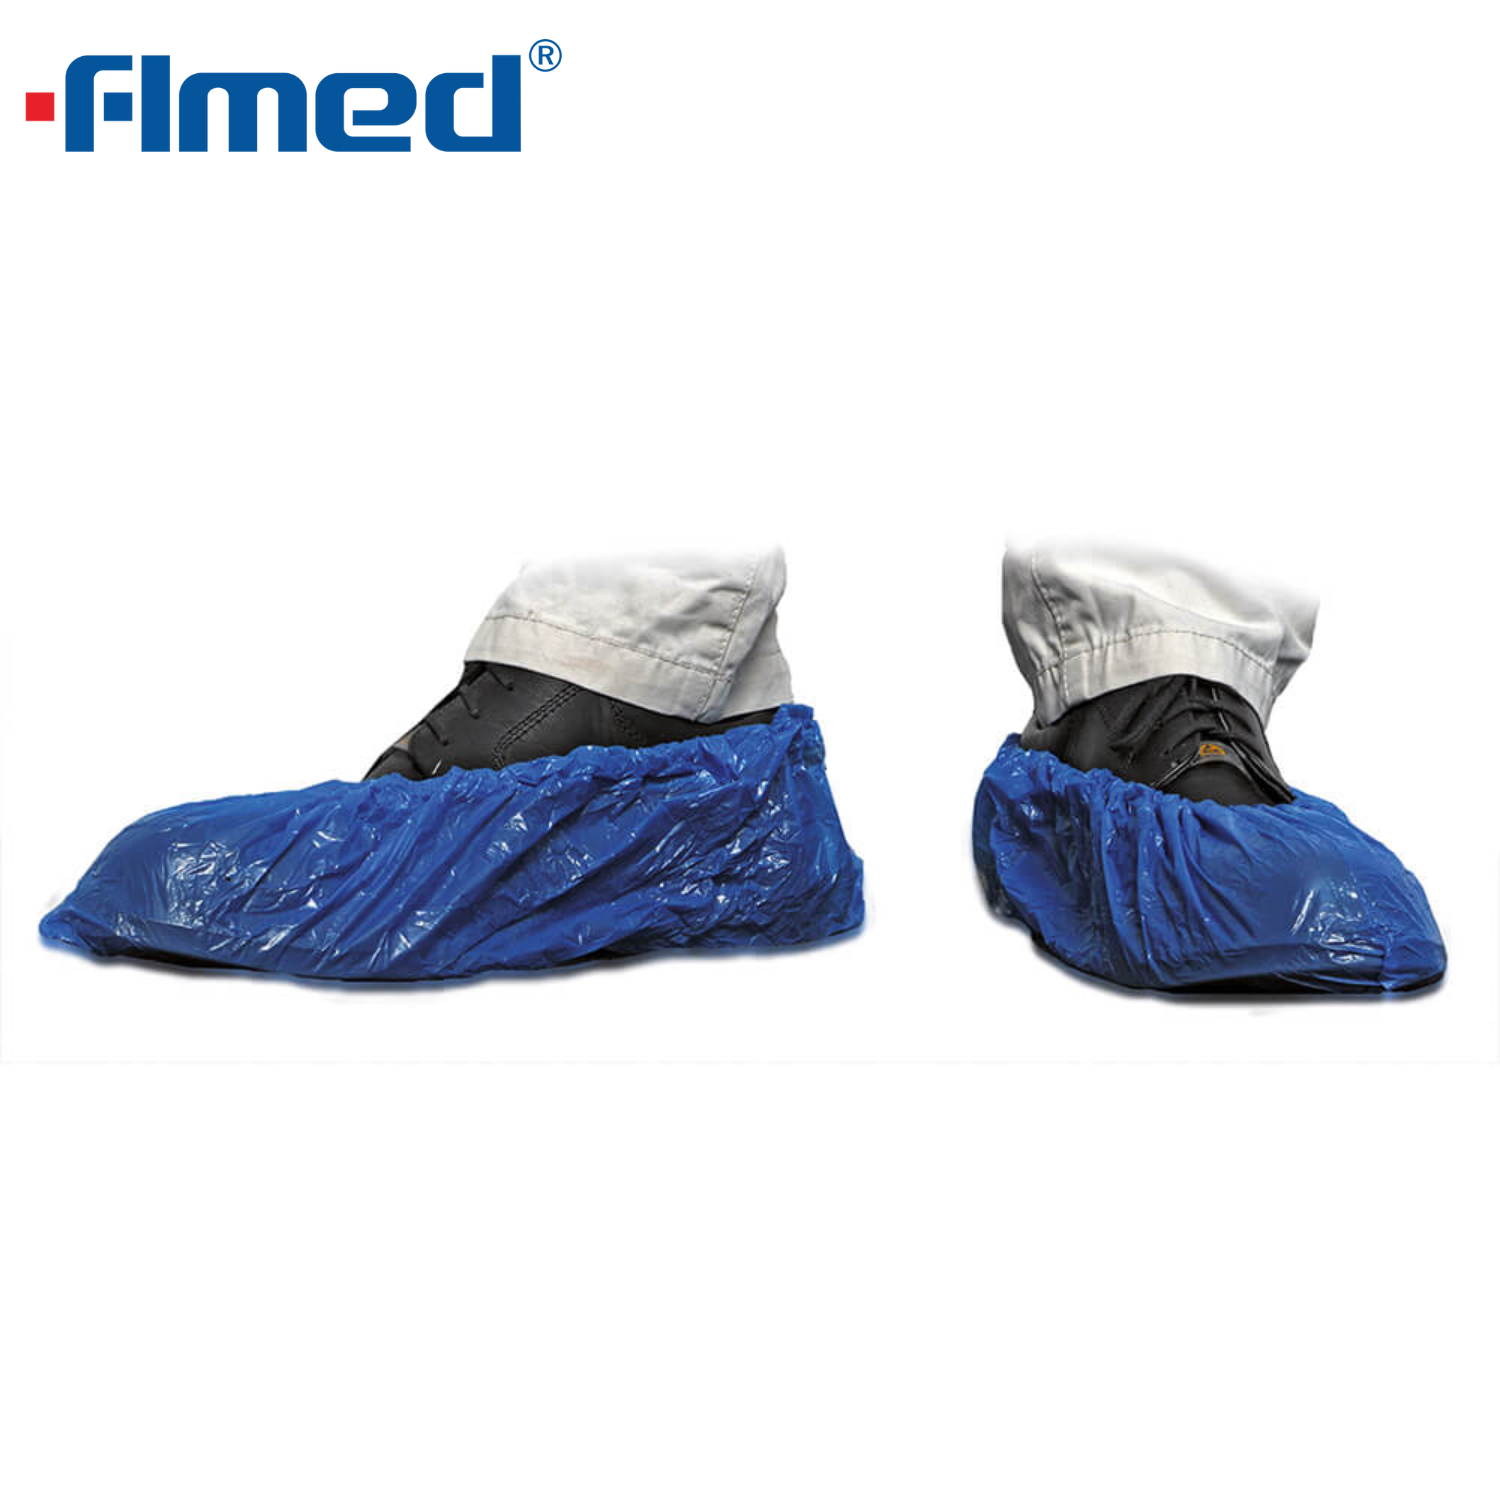 Shoe Covers: A Simple Solution for Infection Control